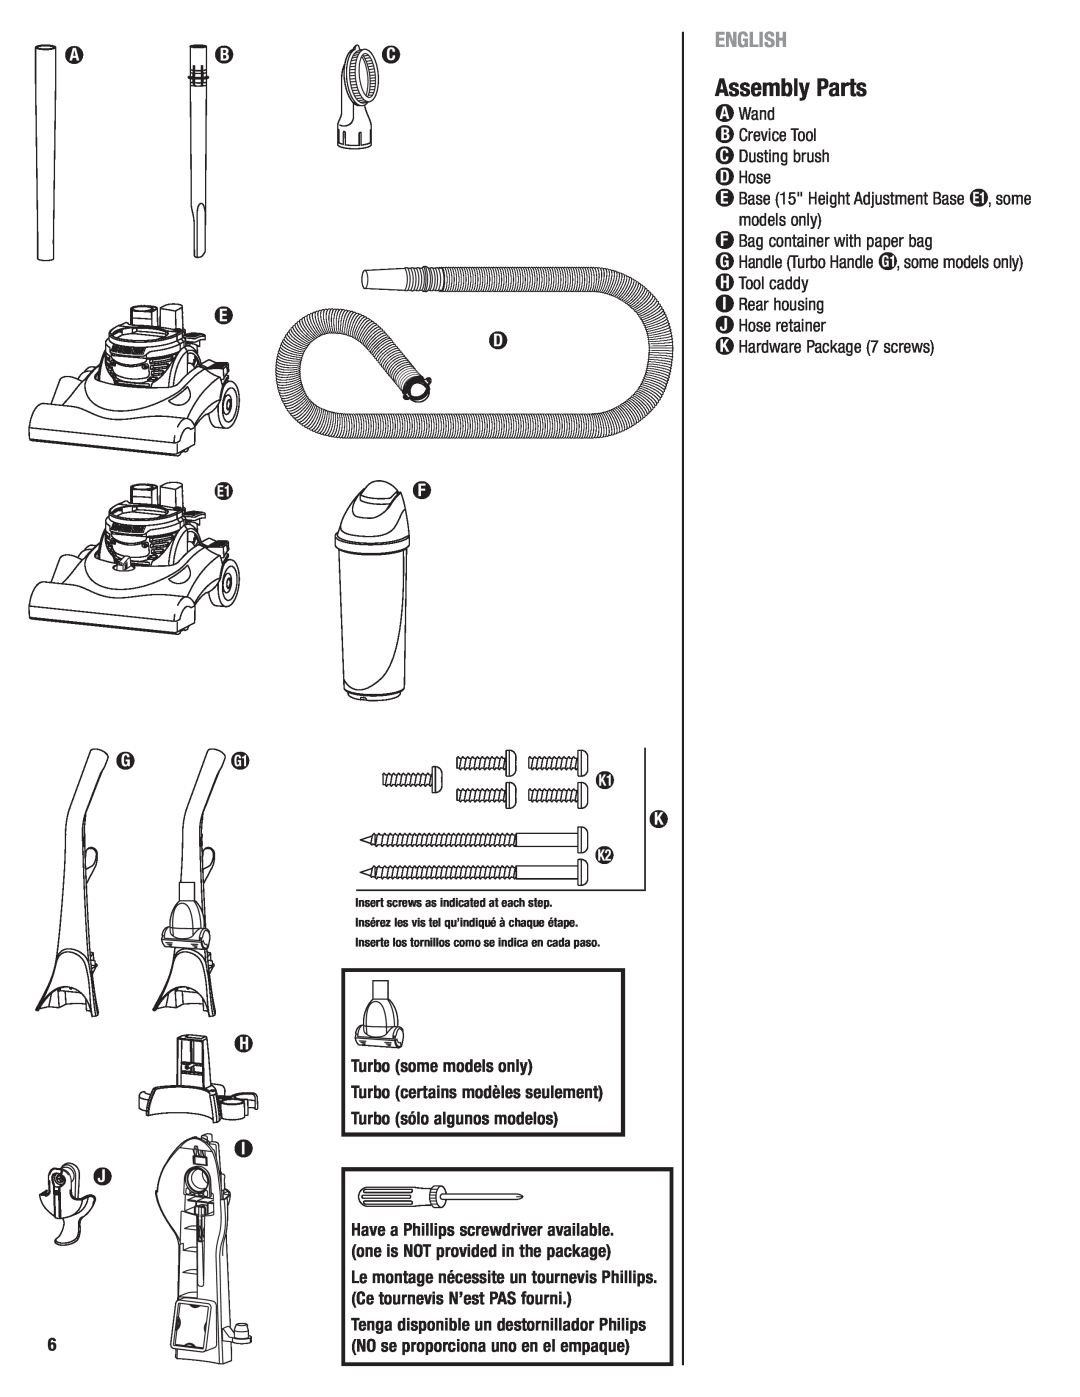 Eureka 4750 manual Assembly Parts, GG1 H I J, C D F, English, Insert screws as indicated at each step 